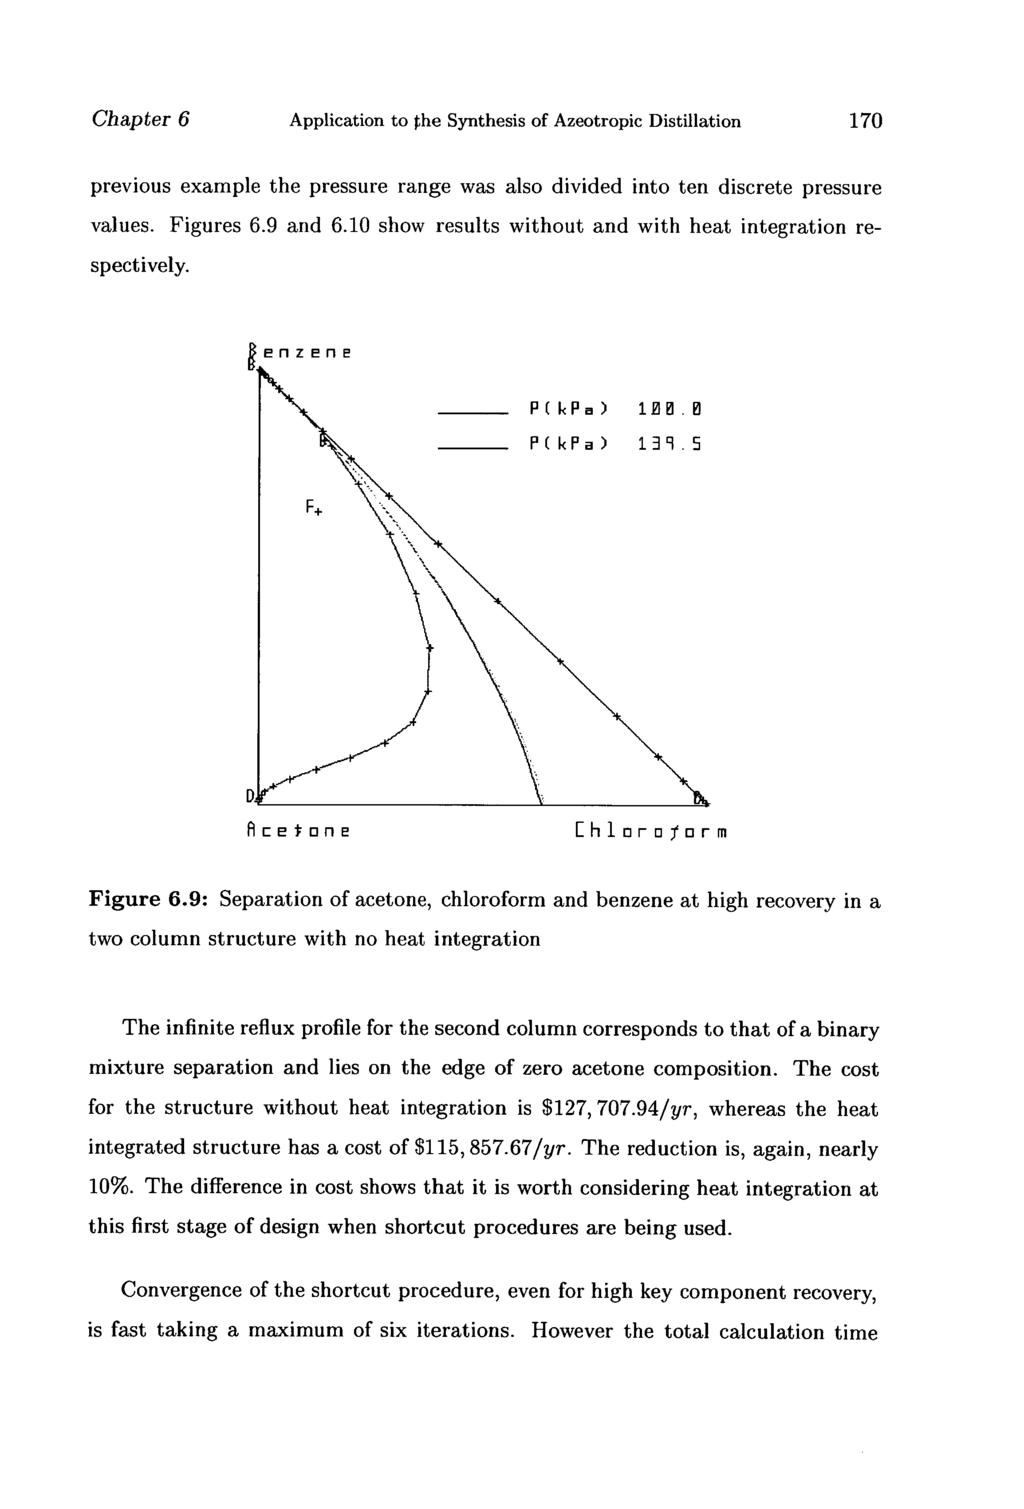 Chapter 6 Application to the Synthesis of Azeotropic Distillation 170 previous example the pressure range was also divided into ten discrete pressure values. Figures 6.9 and 6.